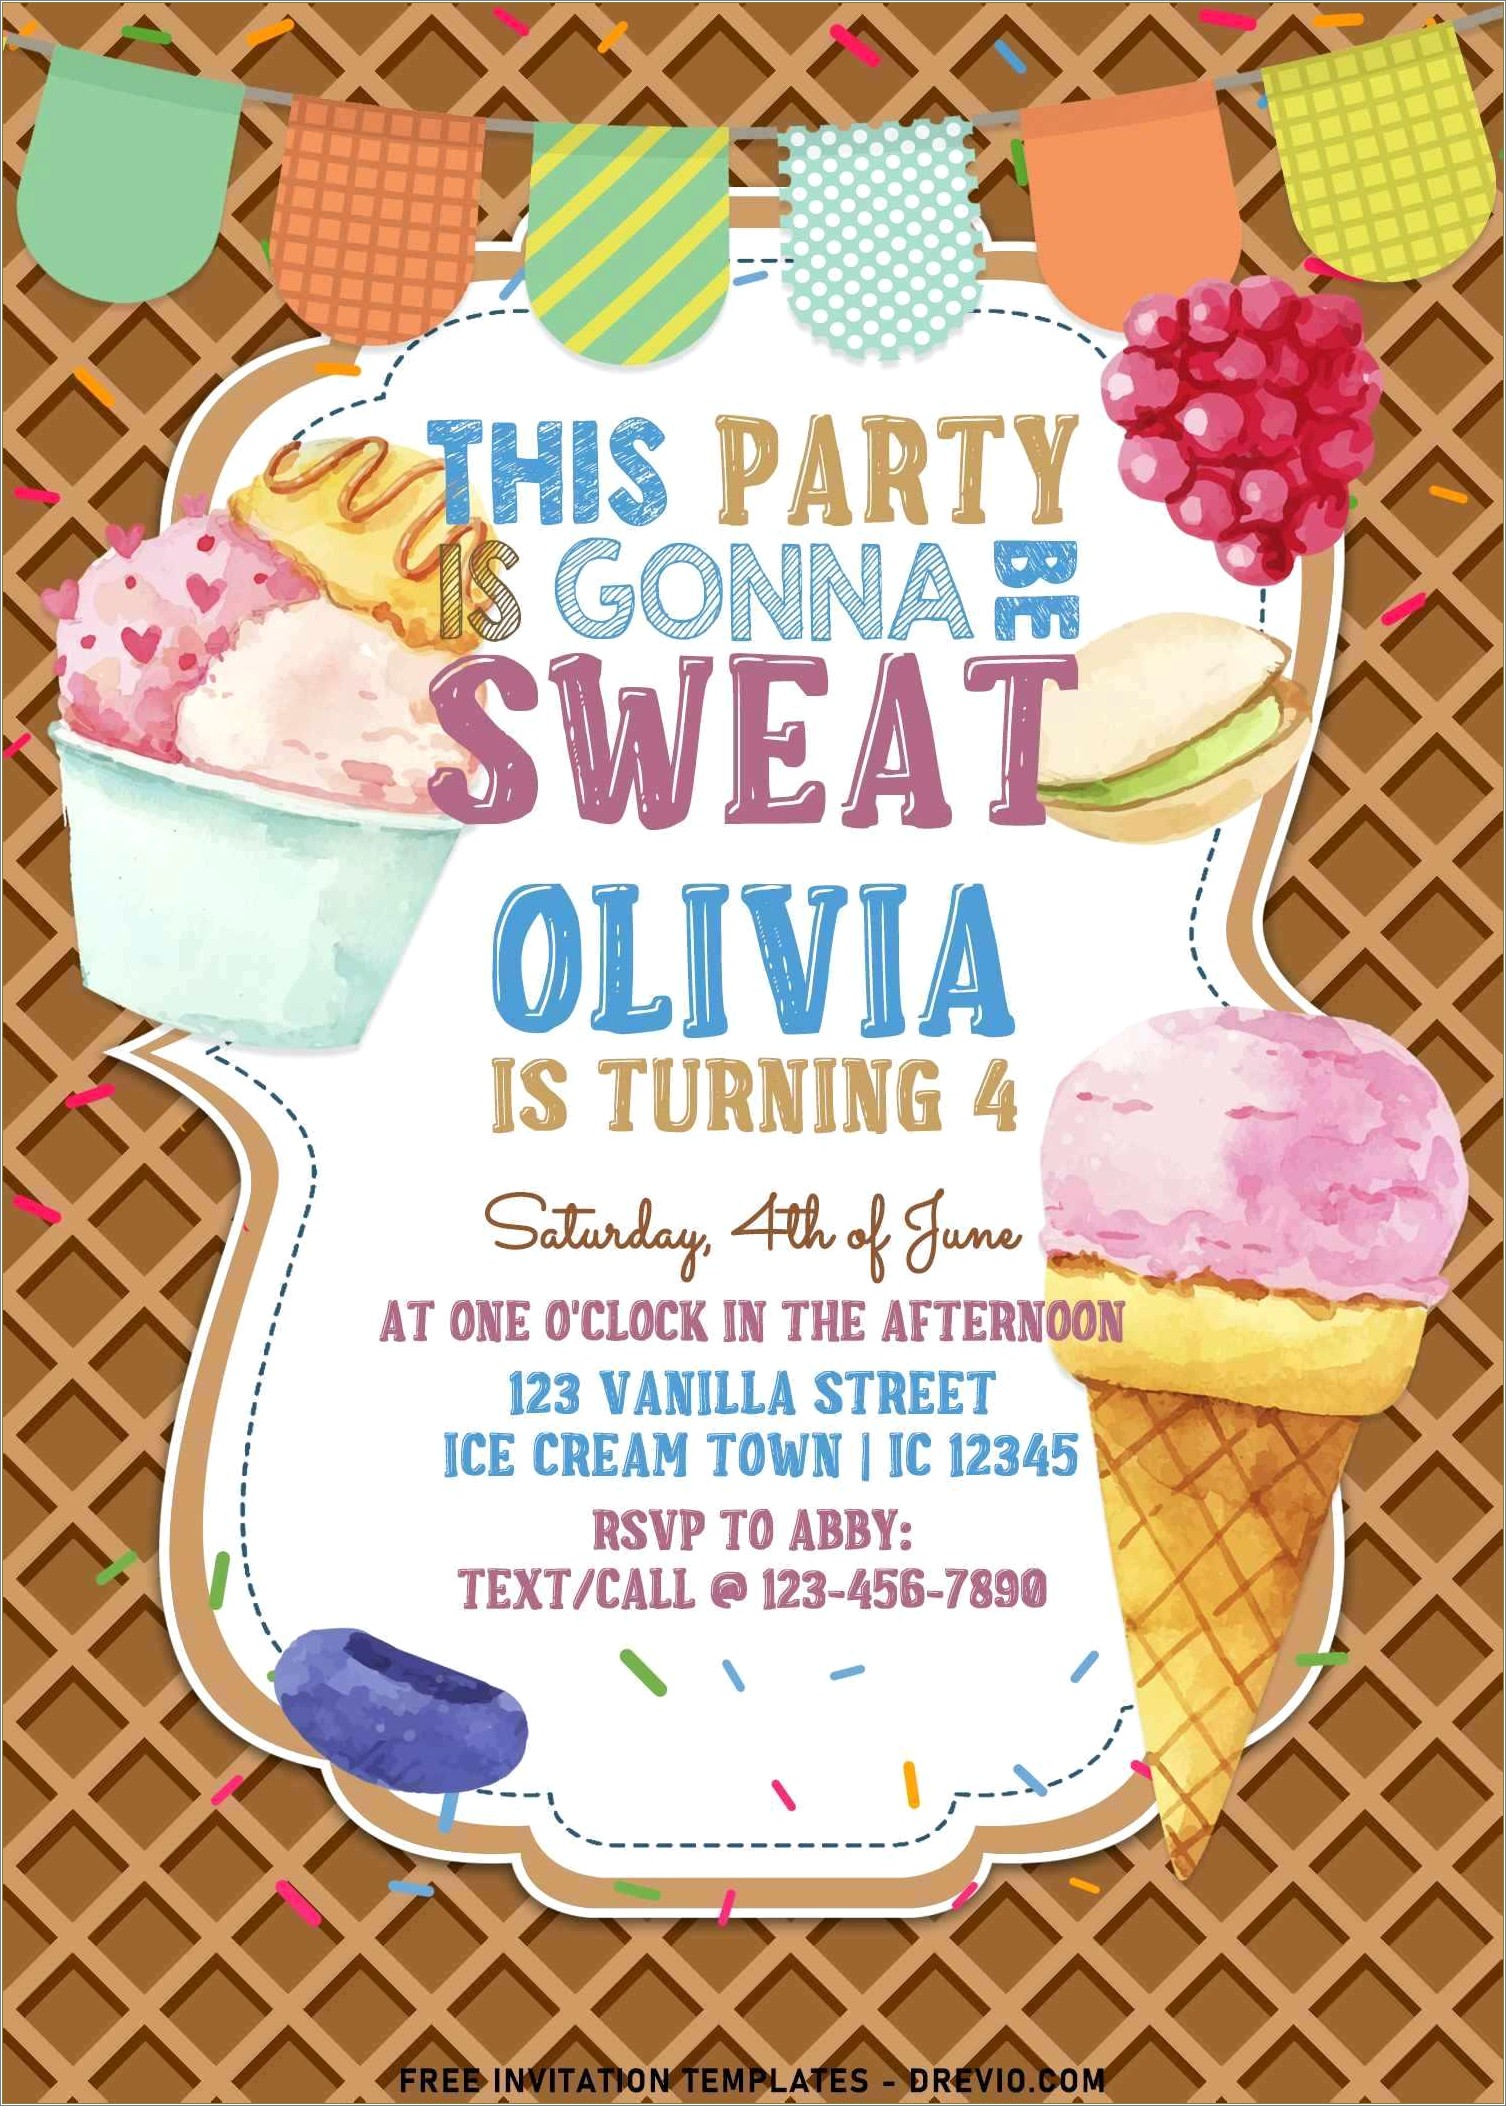 Ice Cream Social Flyer Word Template Free